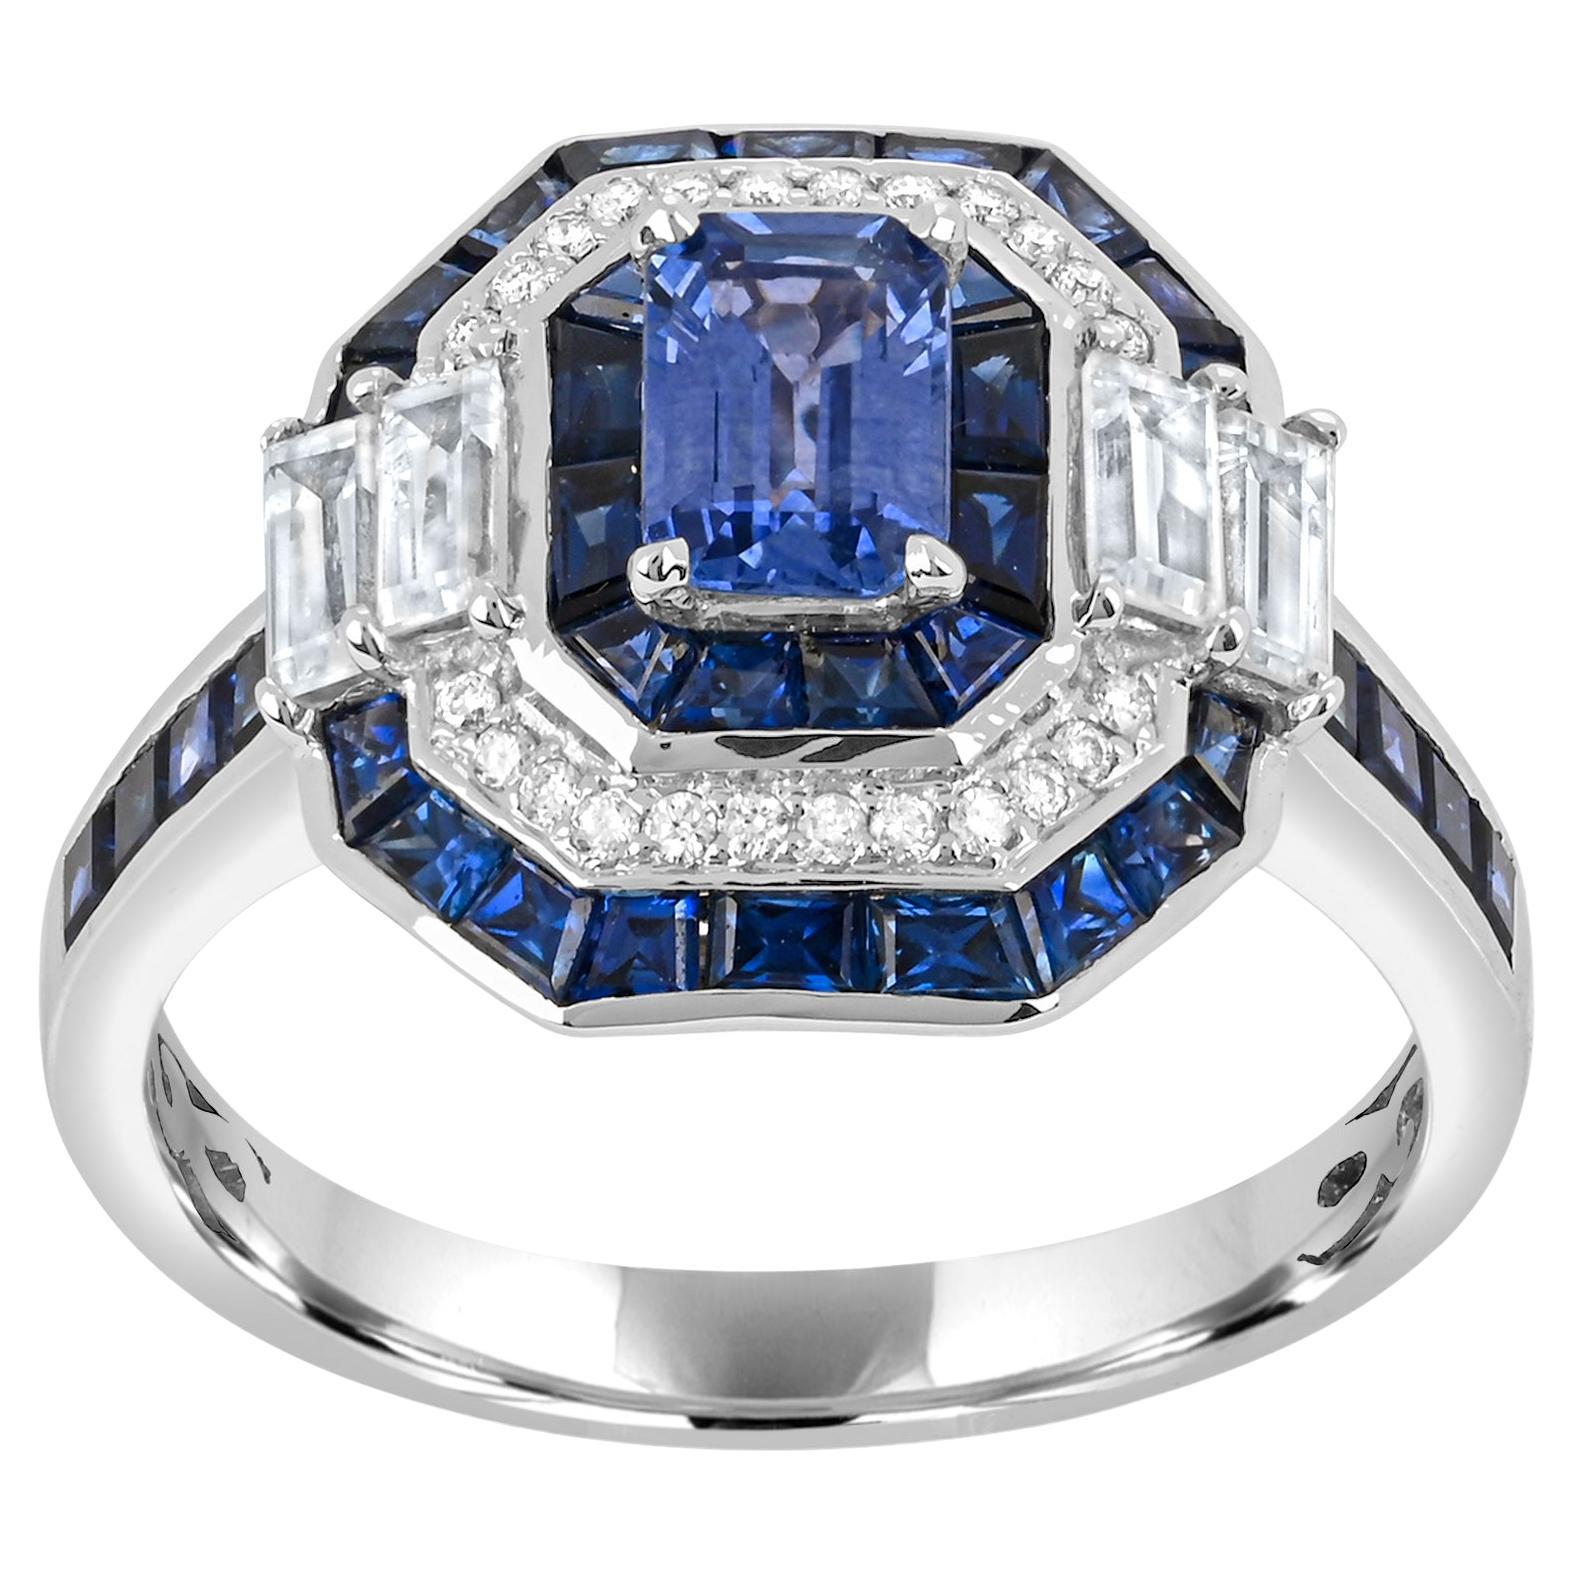 3.90 Carat T.W. Sapphire and Diamond Accent Cocktail Ring in 14k White Gold